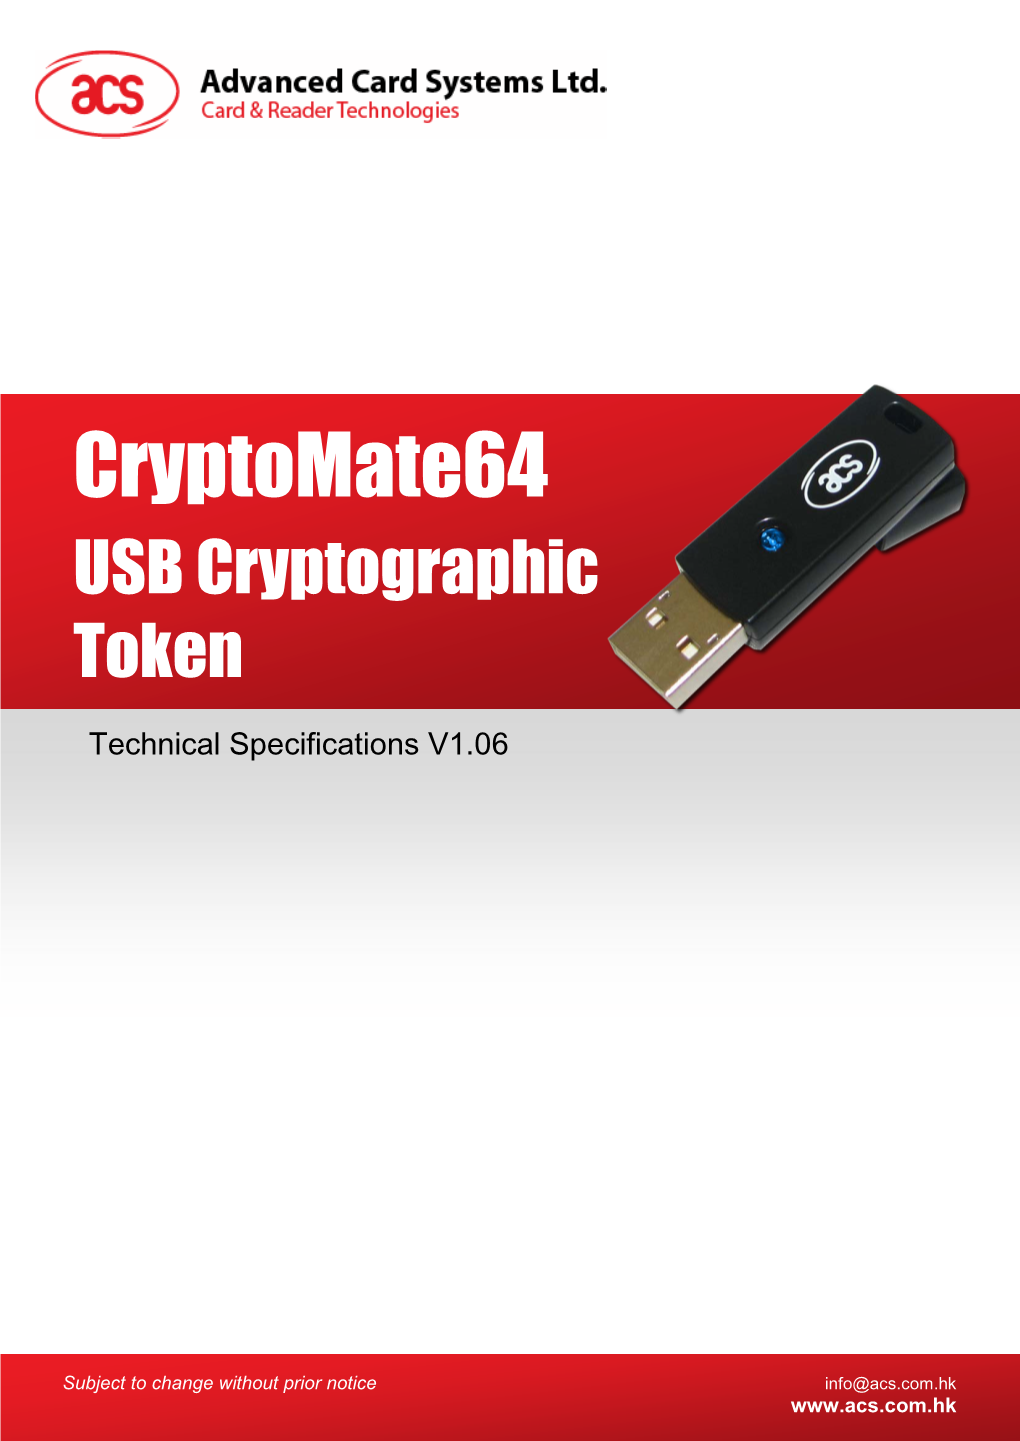 Technical Specification of Cryptomate64 USB Cryptographic